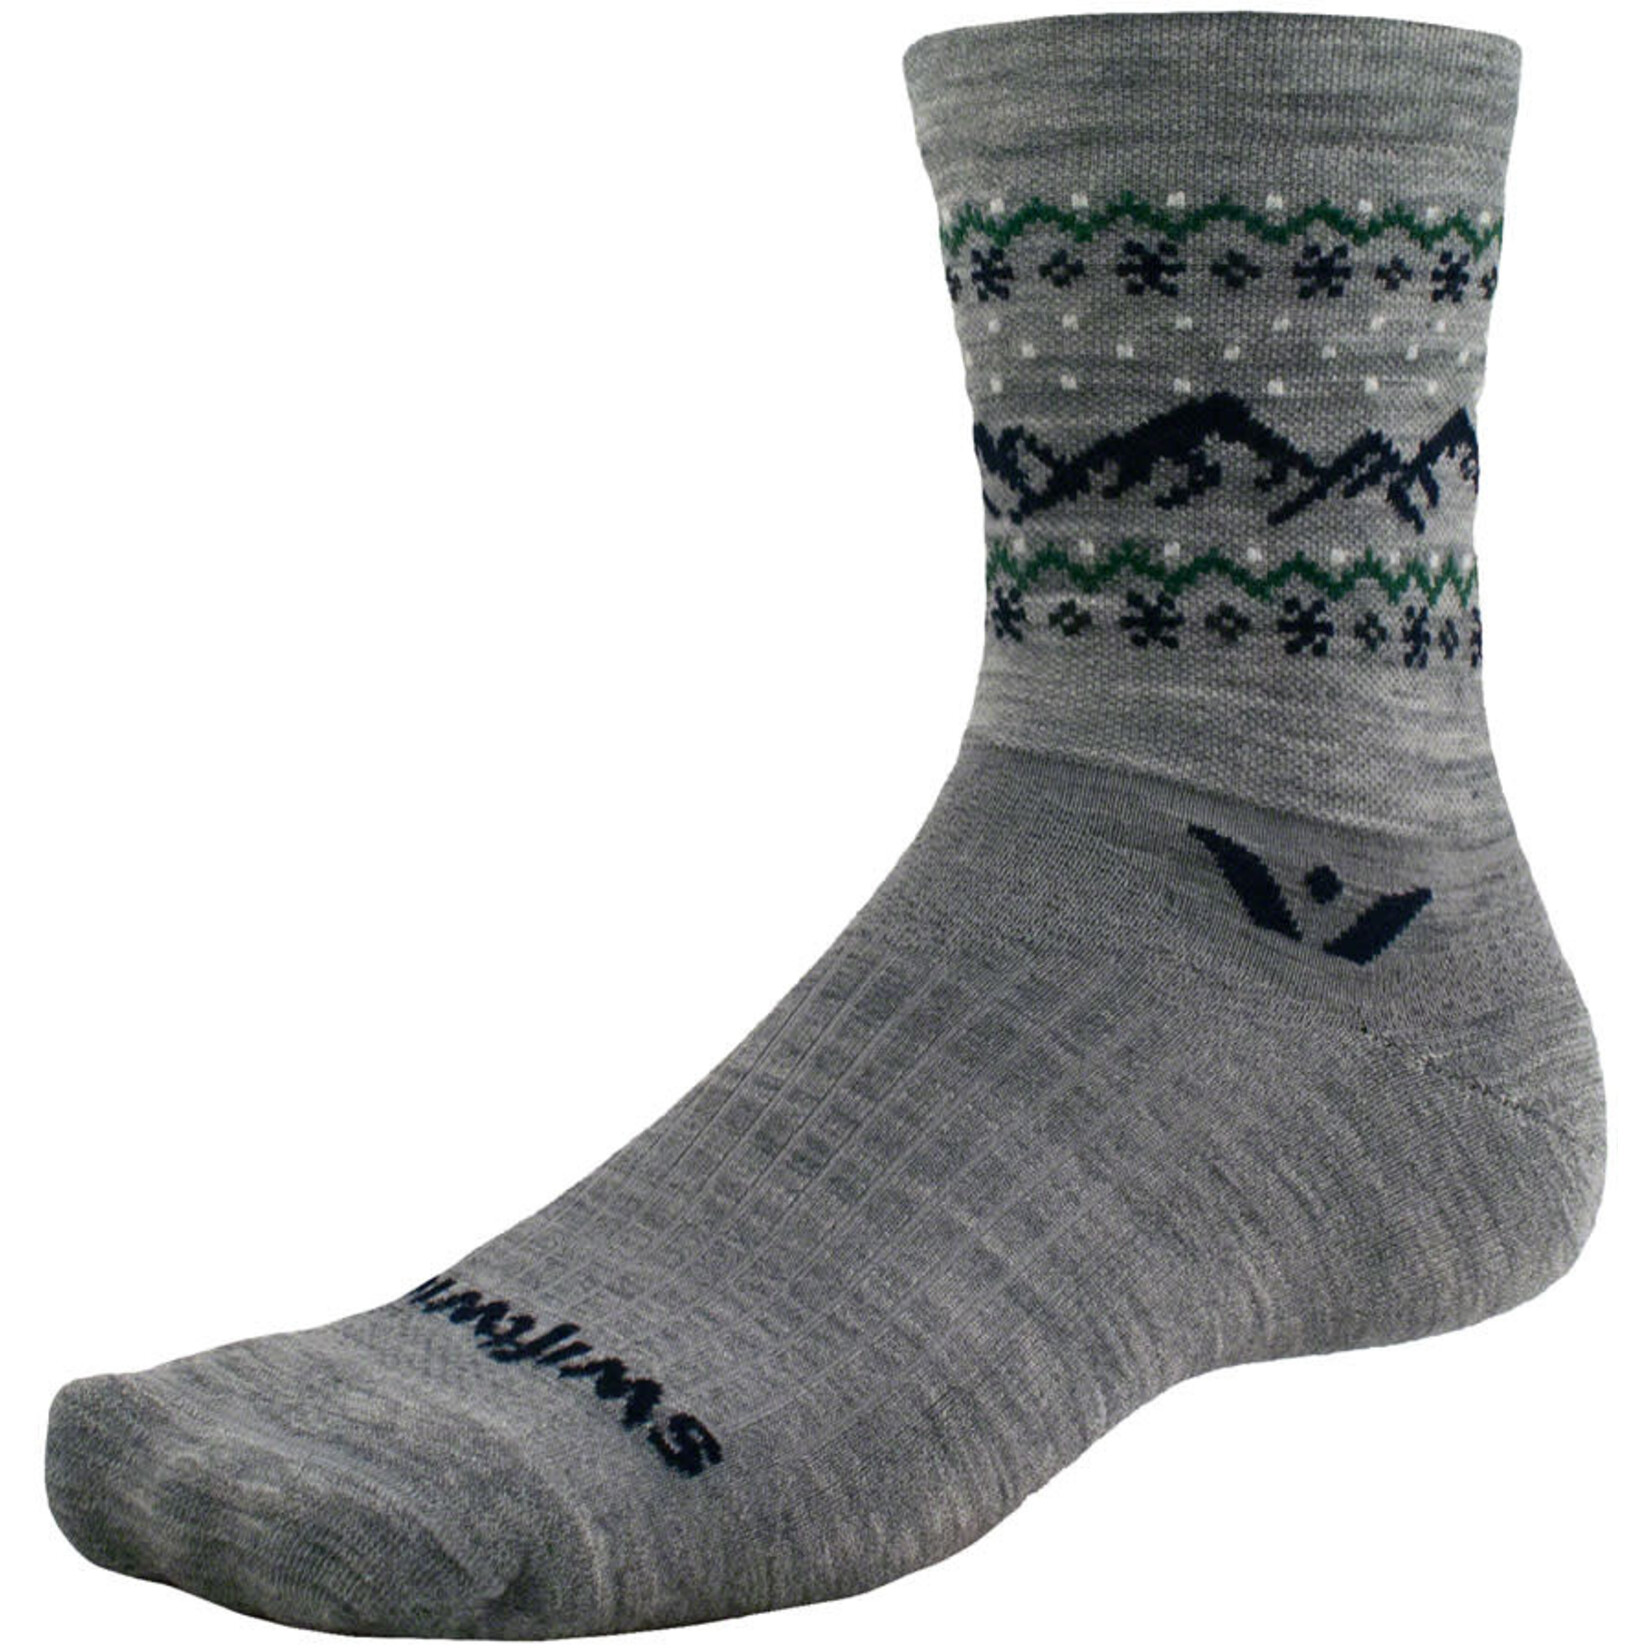 Swiftwick Swiftwick Vision Five Socks - 5 inch, Snow Capped Heather, Large